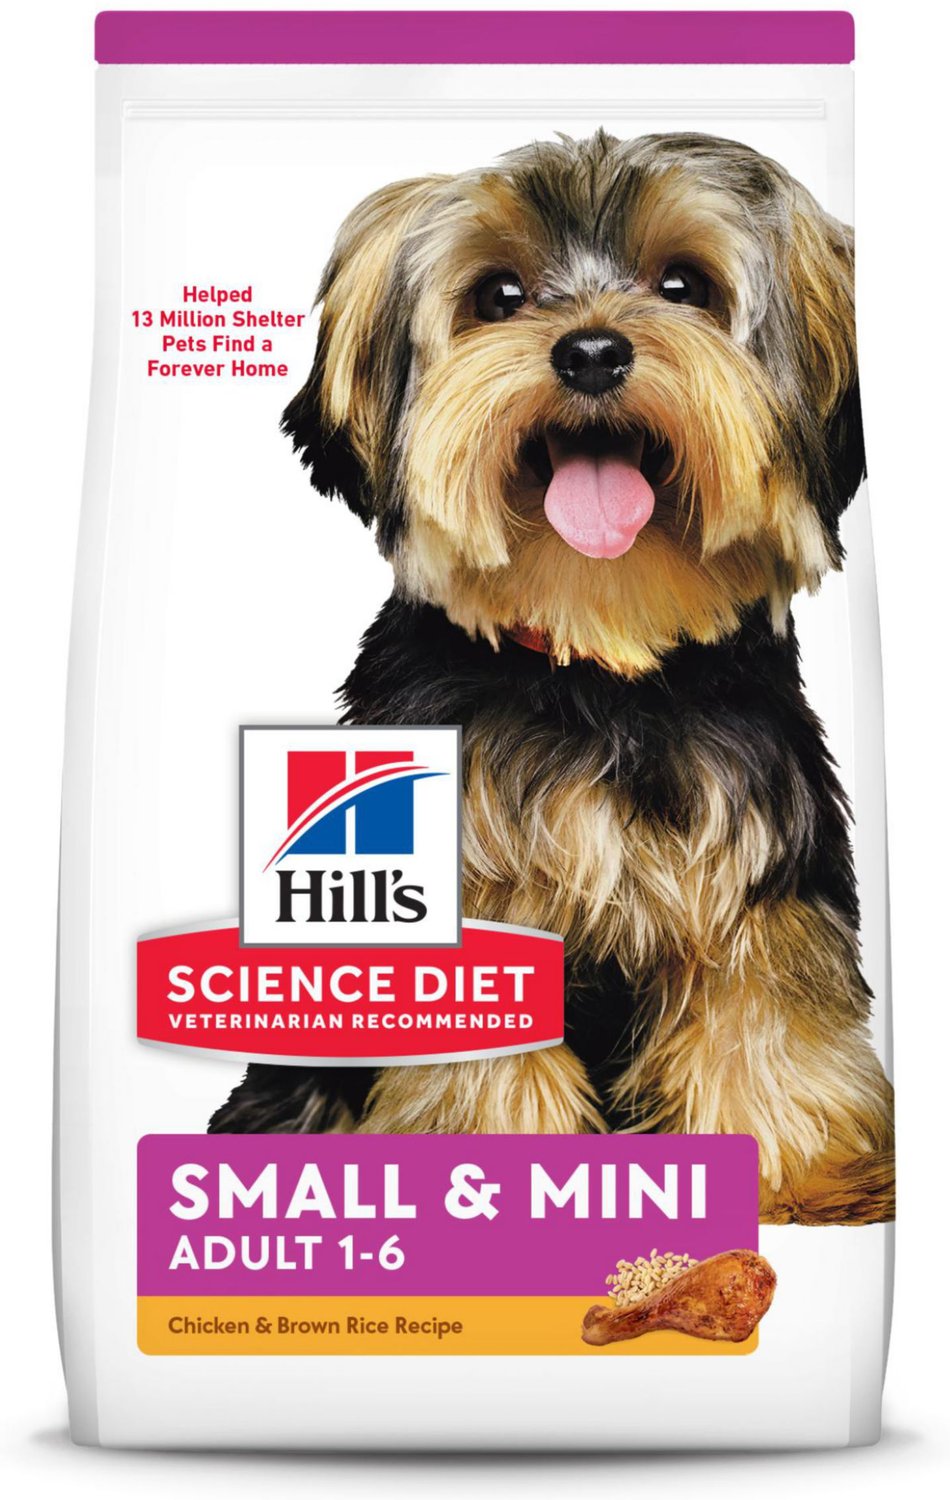 Hill’s Science Diet Adult Small Paws Chicken Meal